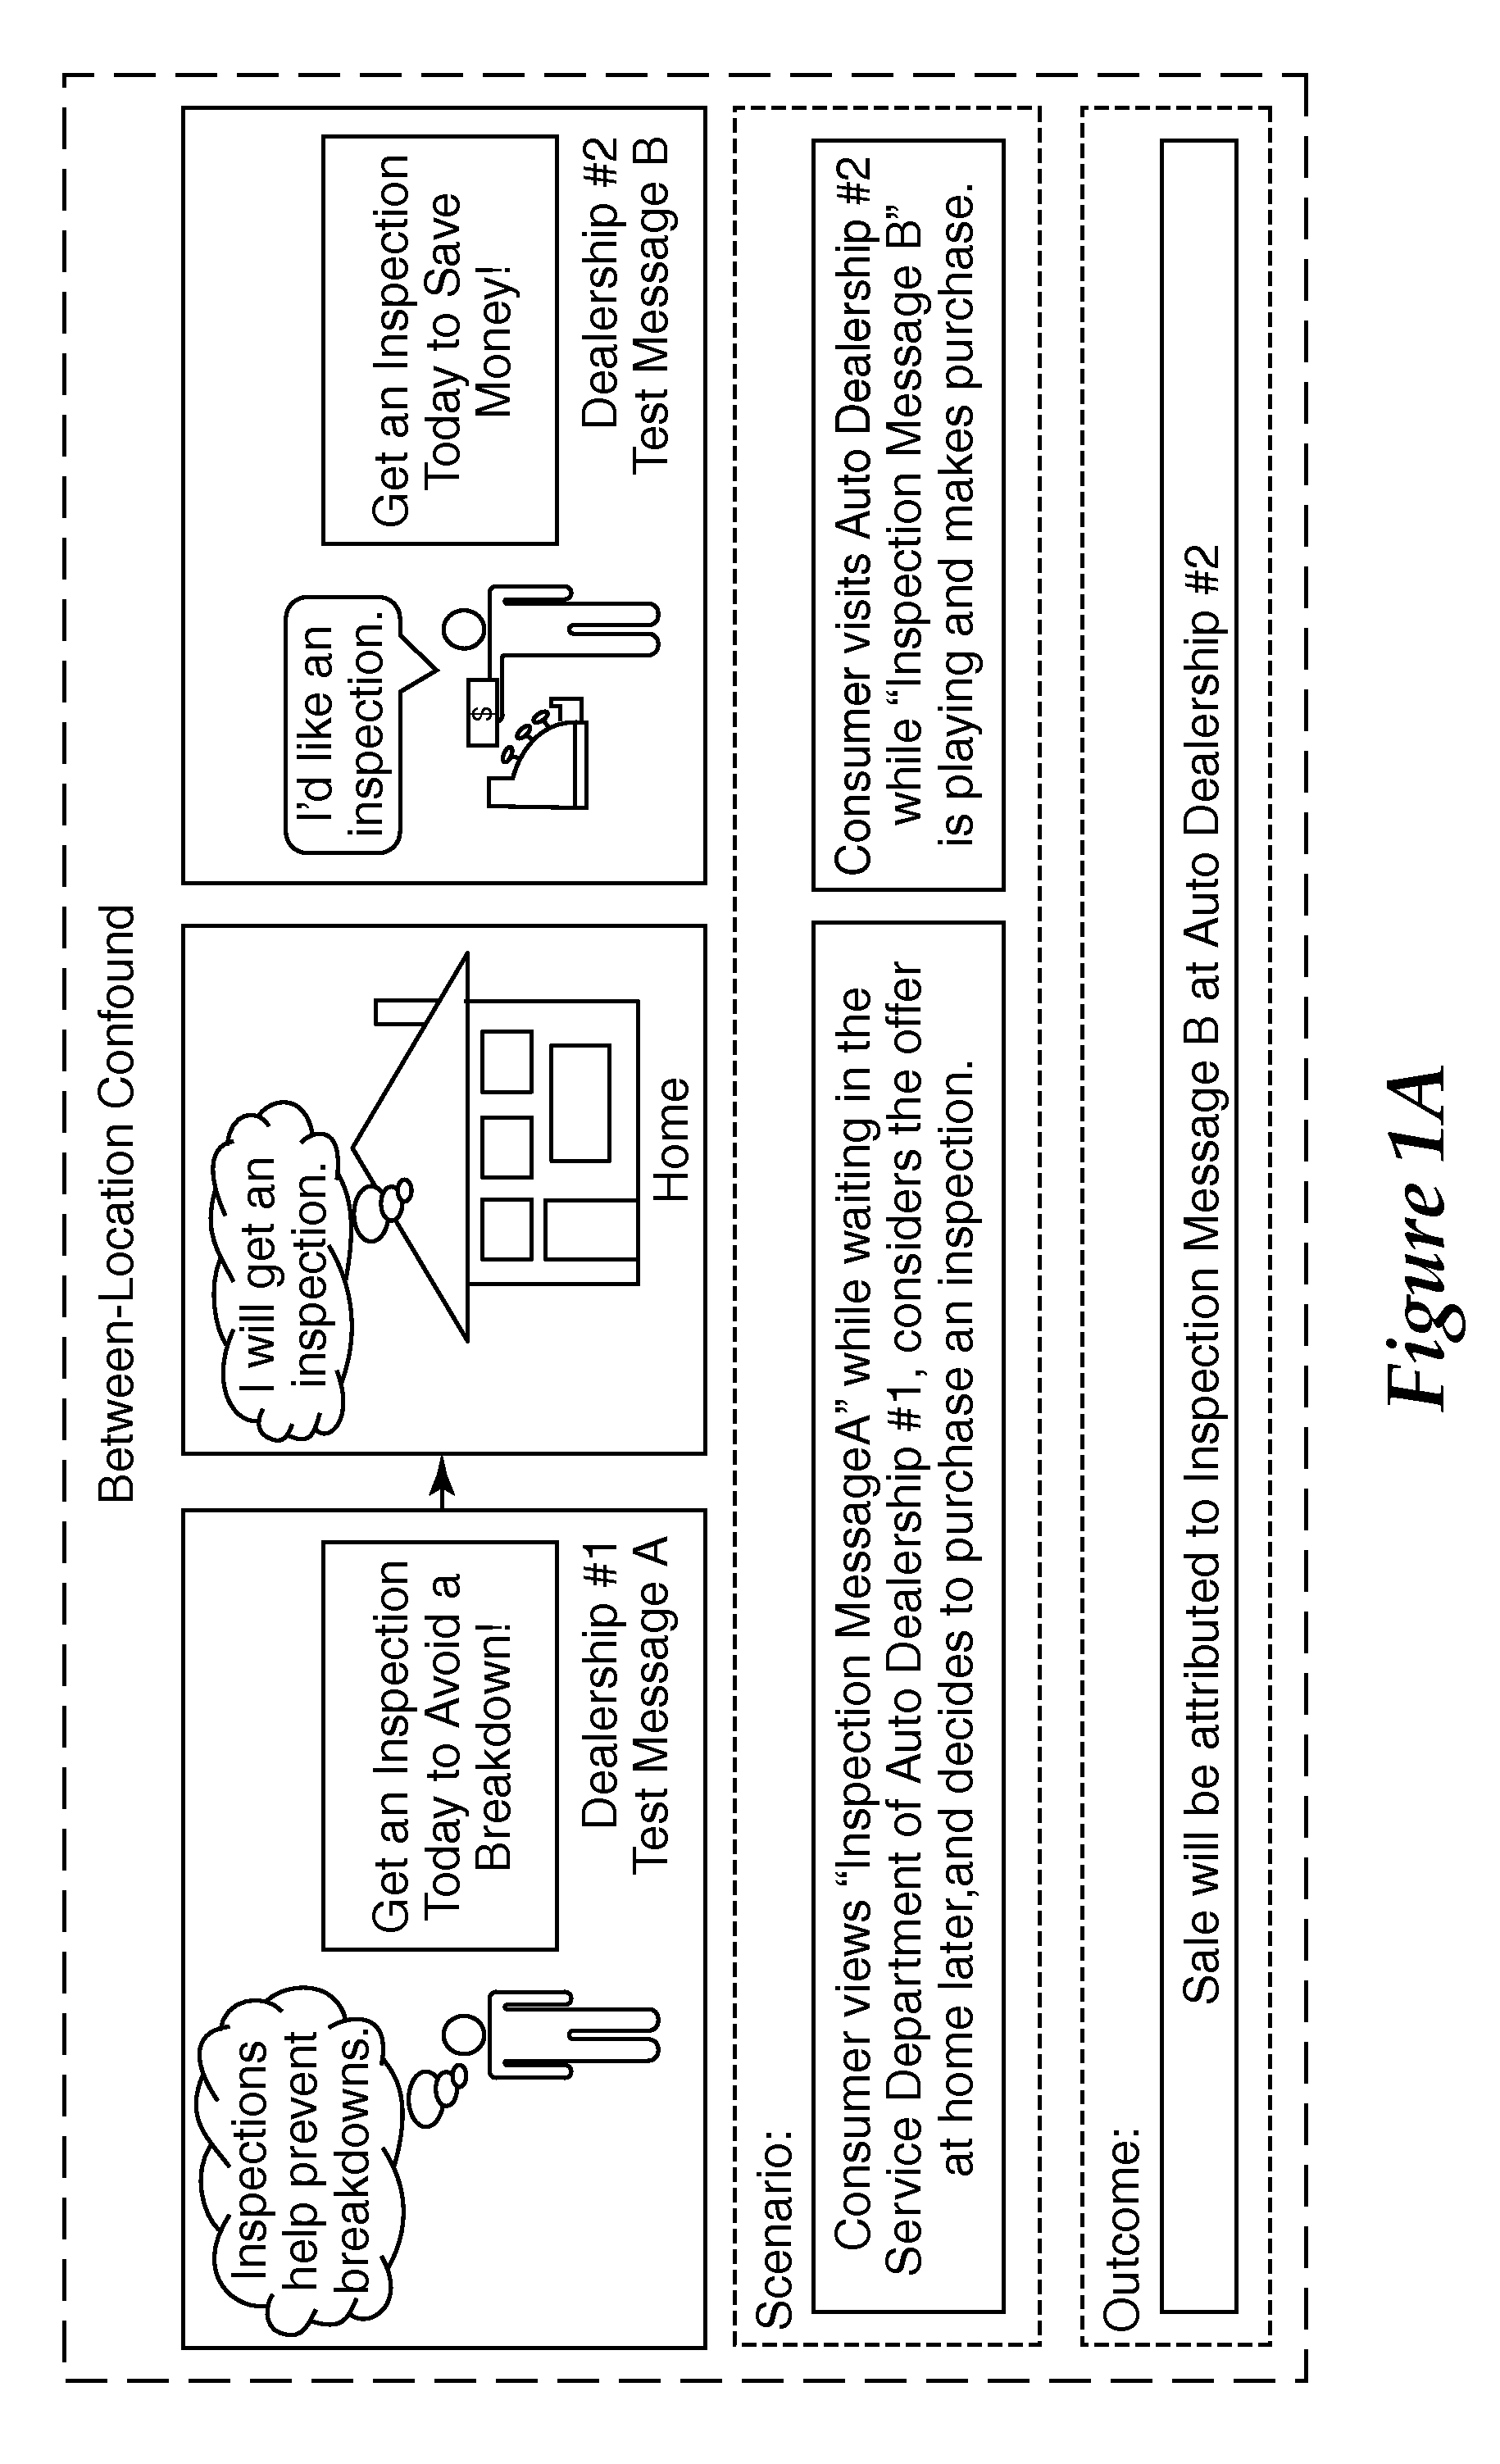 System and method for generating time-slot samples to which content may be assigned for measuring effects of the assigned content